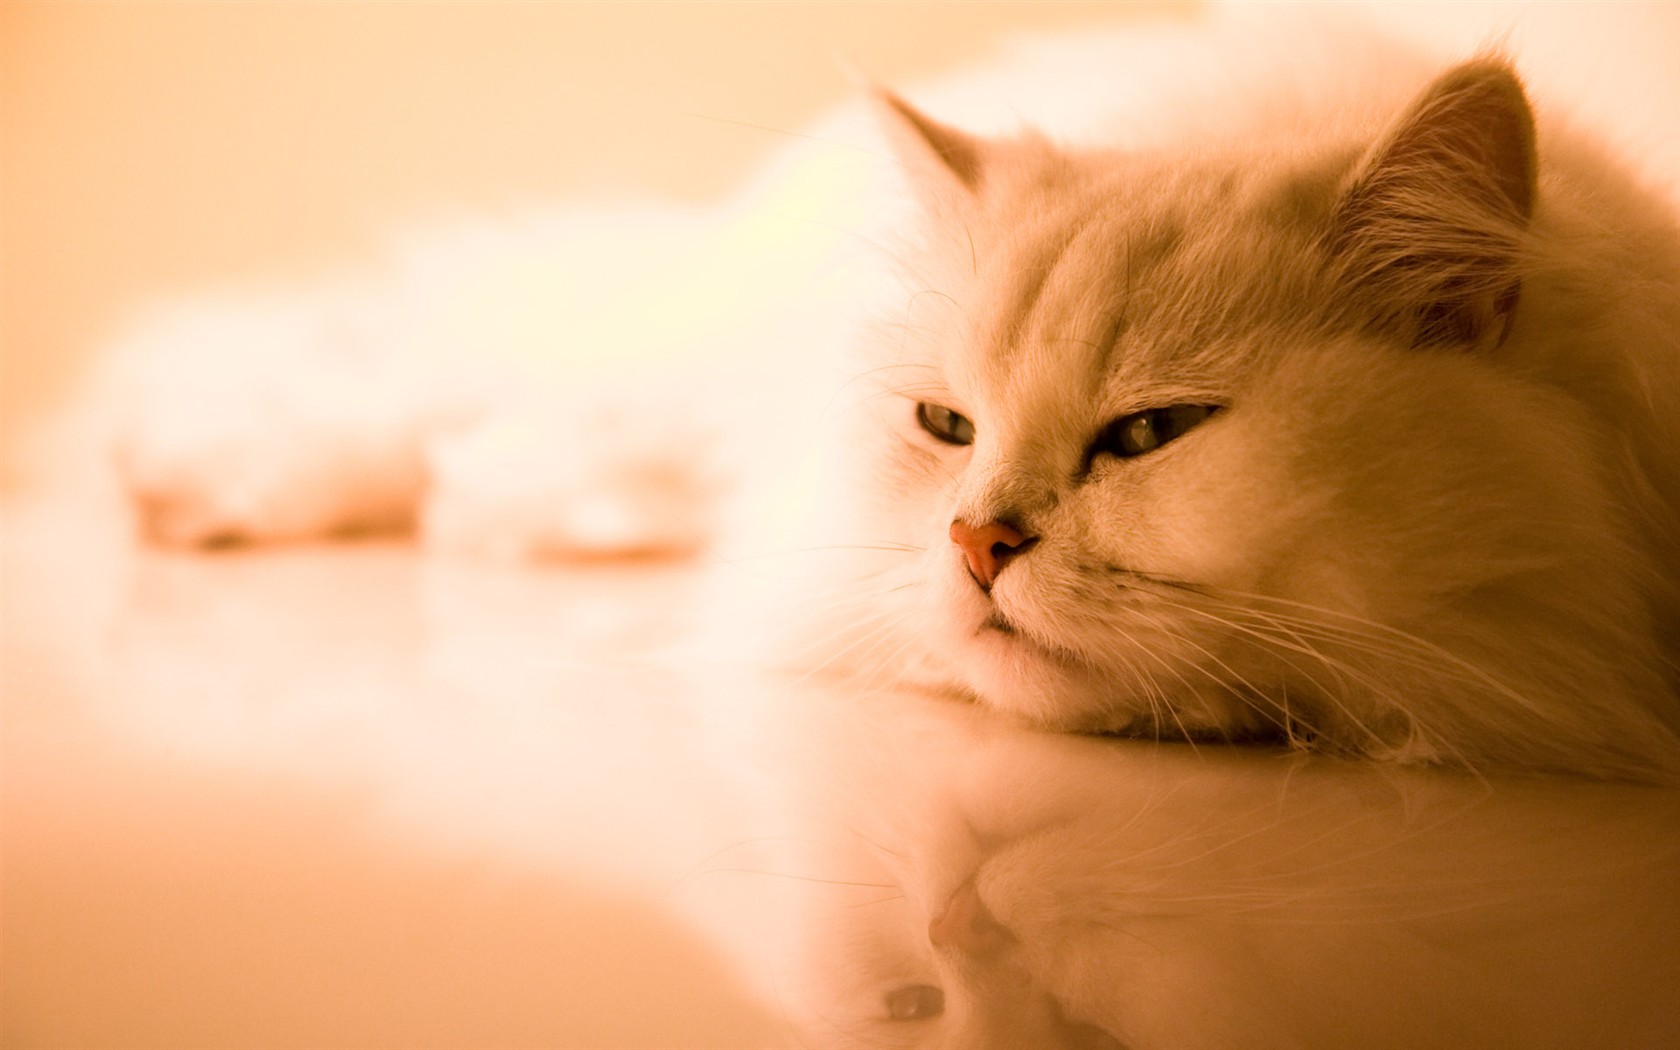 Cat photo HD Wallpapers #35 - 1680x1050